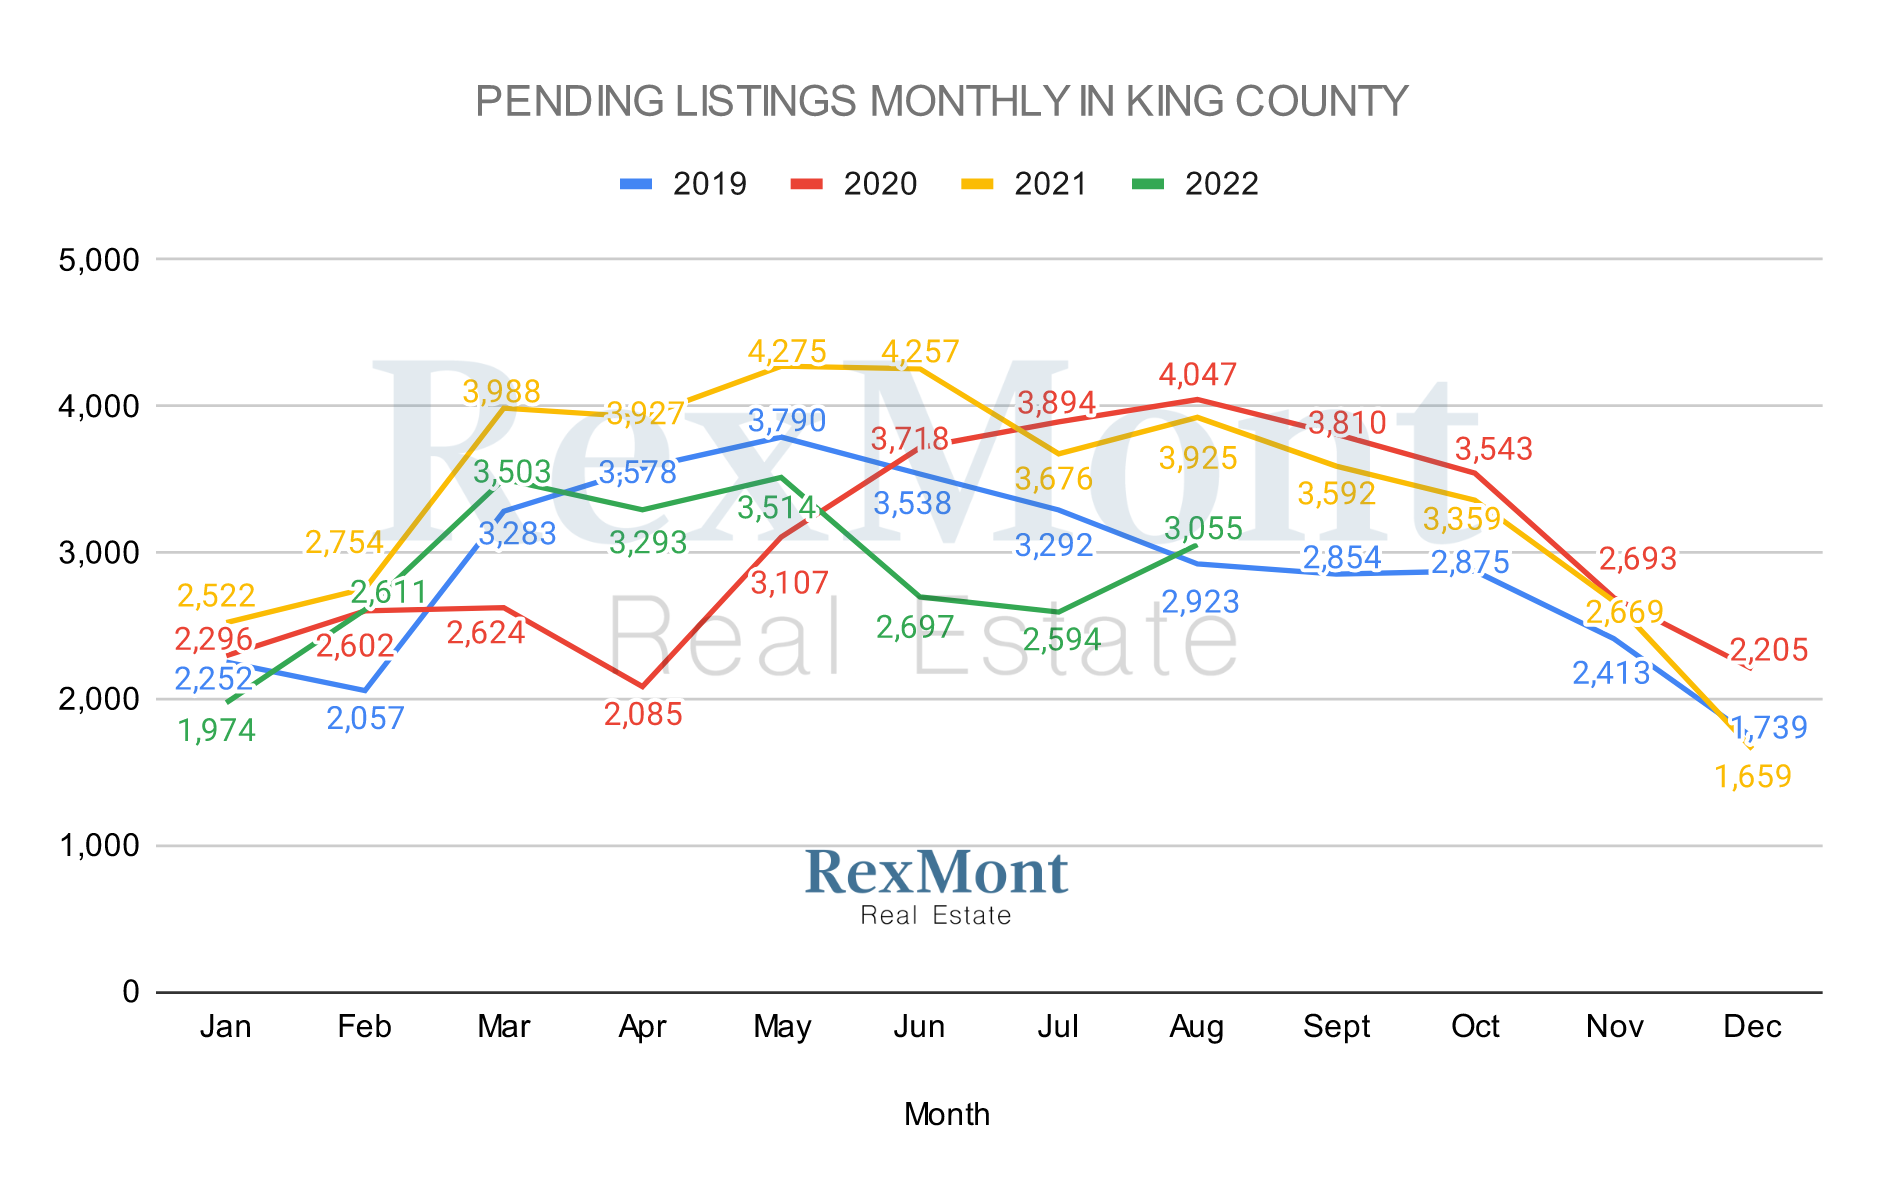 Graph of King County Pending Listings By Month